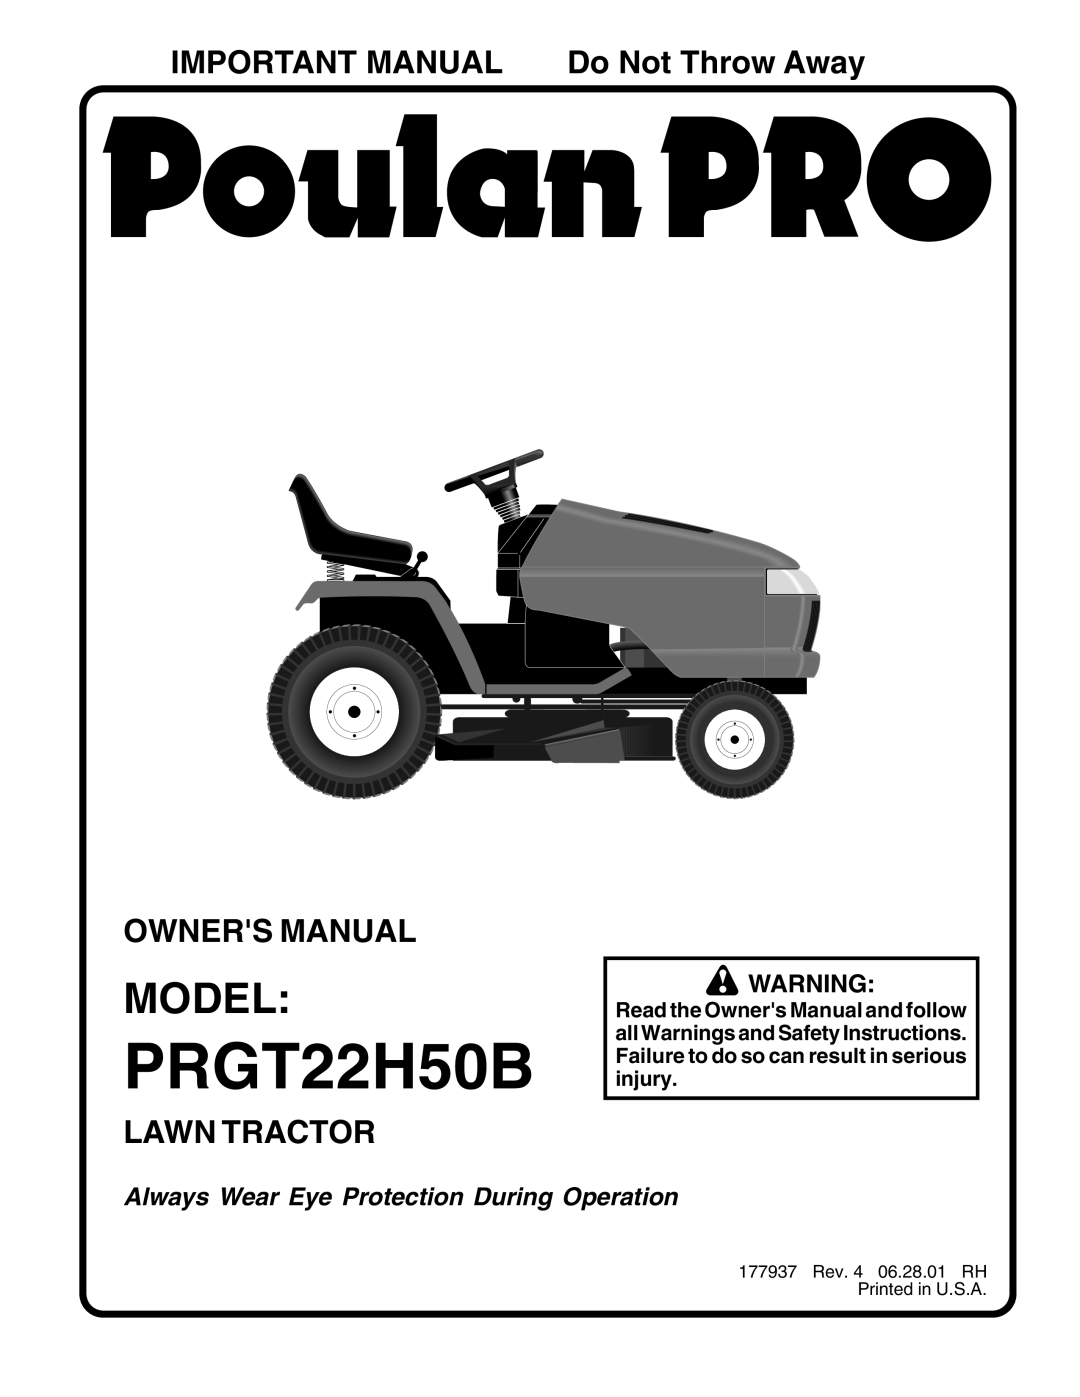 Poulan 177937 owner manual Model, IMPORTANT MANUAL Do Not Throw Away, Owners Manual, Lawn Tractor, PRGT22H50B 